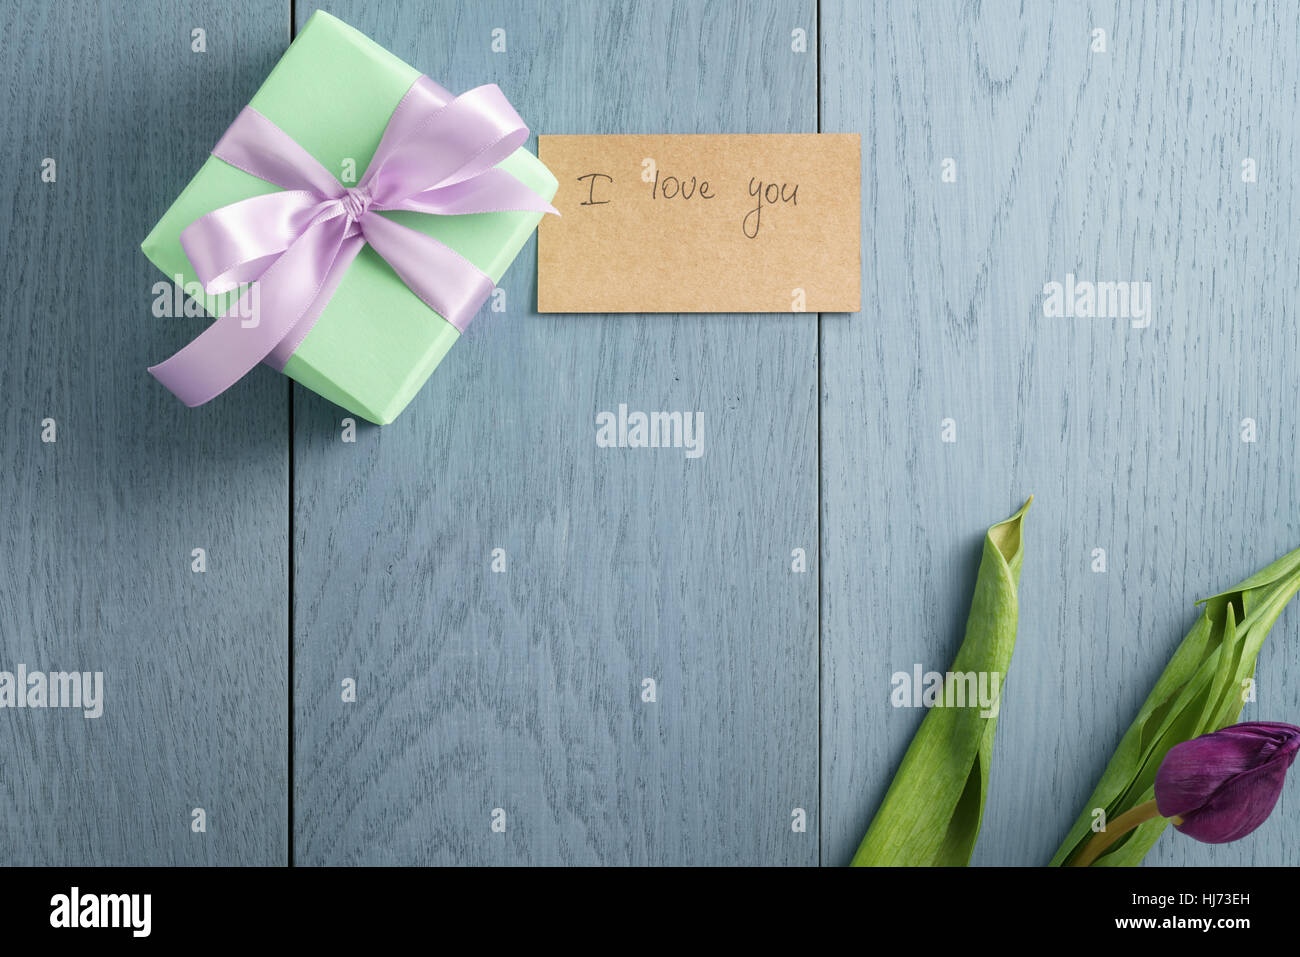 green gift box on blue wood table with paper card i love you Stock Photo